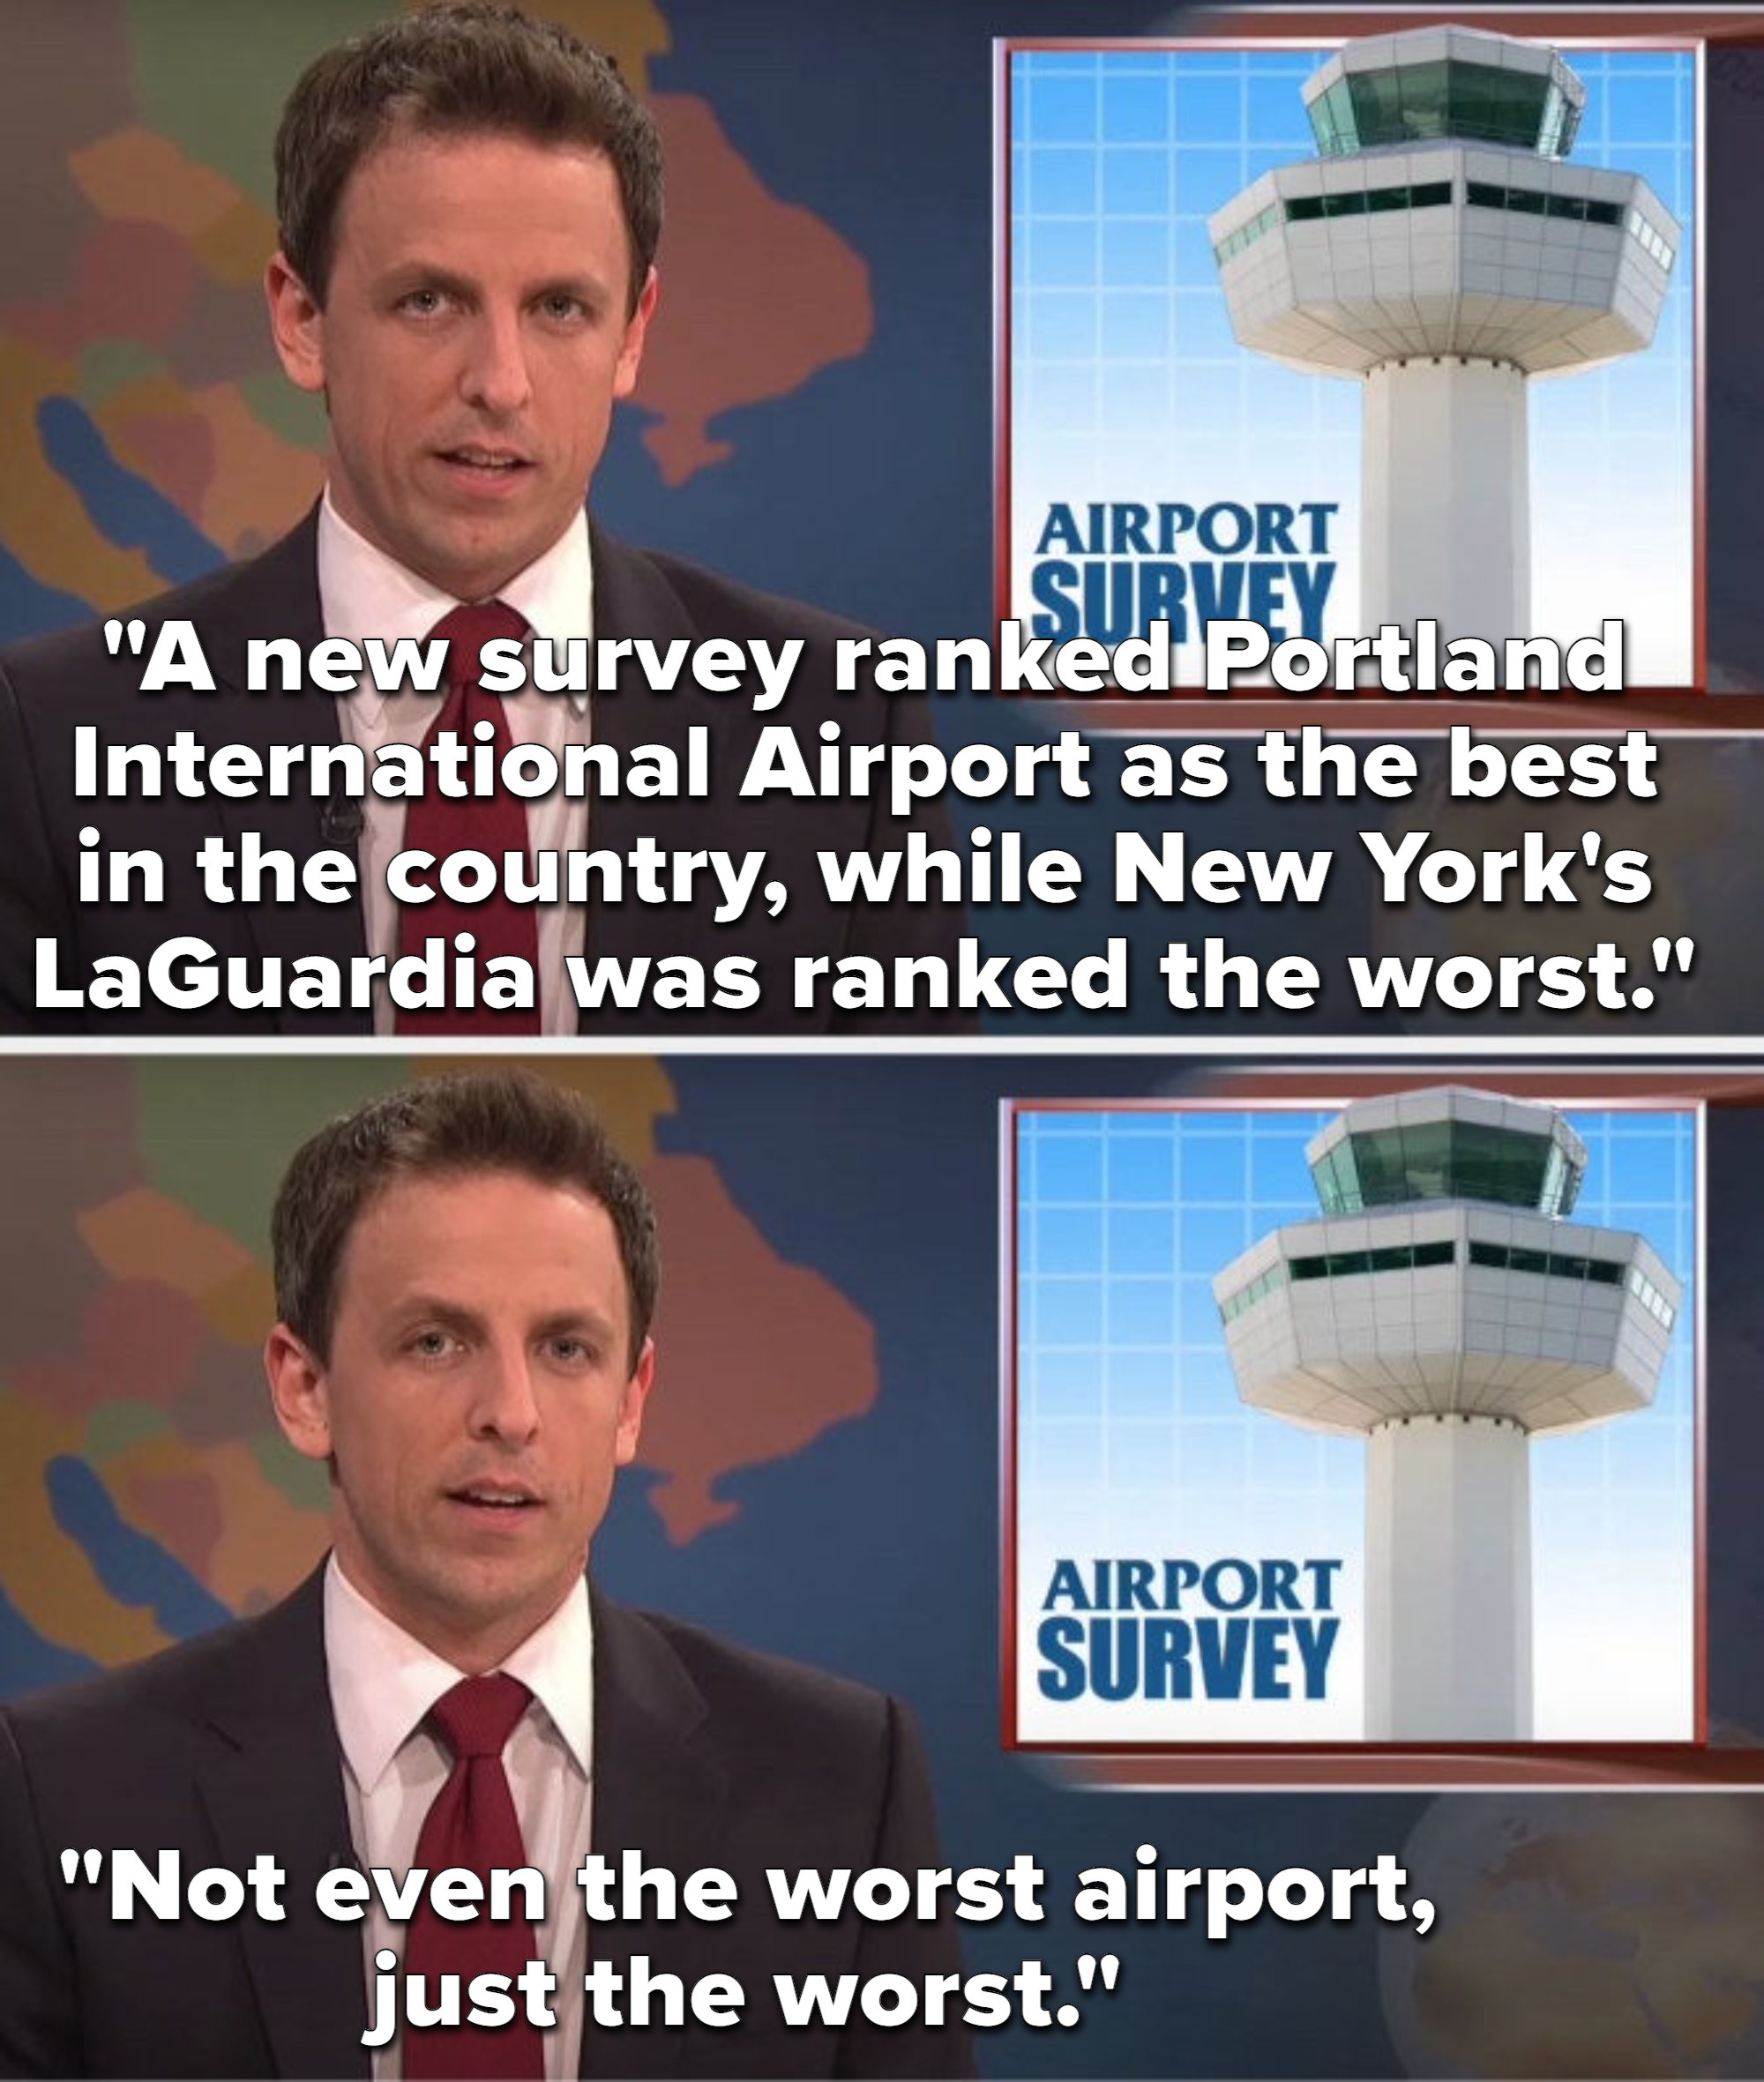 Meyers says, A new survey ranked Portland International Airport as the best in the country, while New York&#x27;s LaGuardia was ranked the worst, not even the worst airport, just the worst